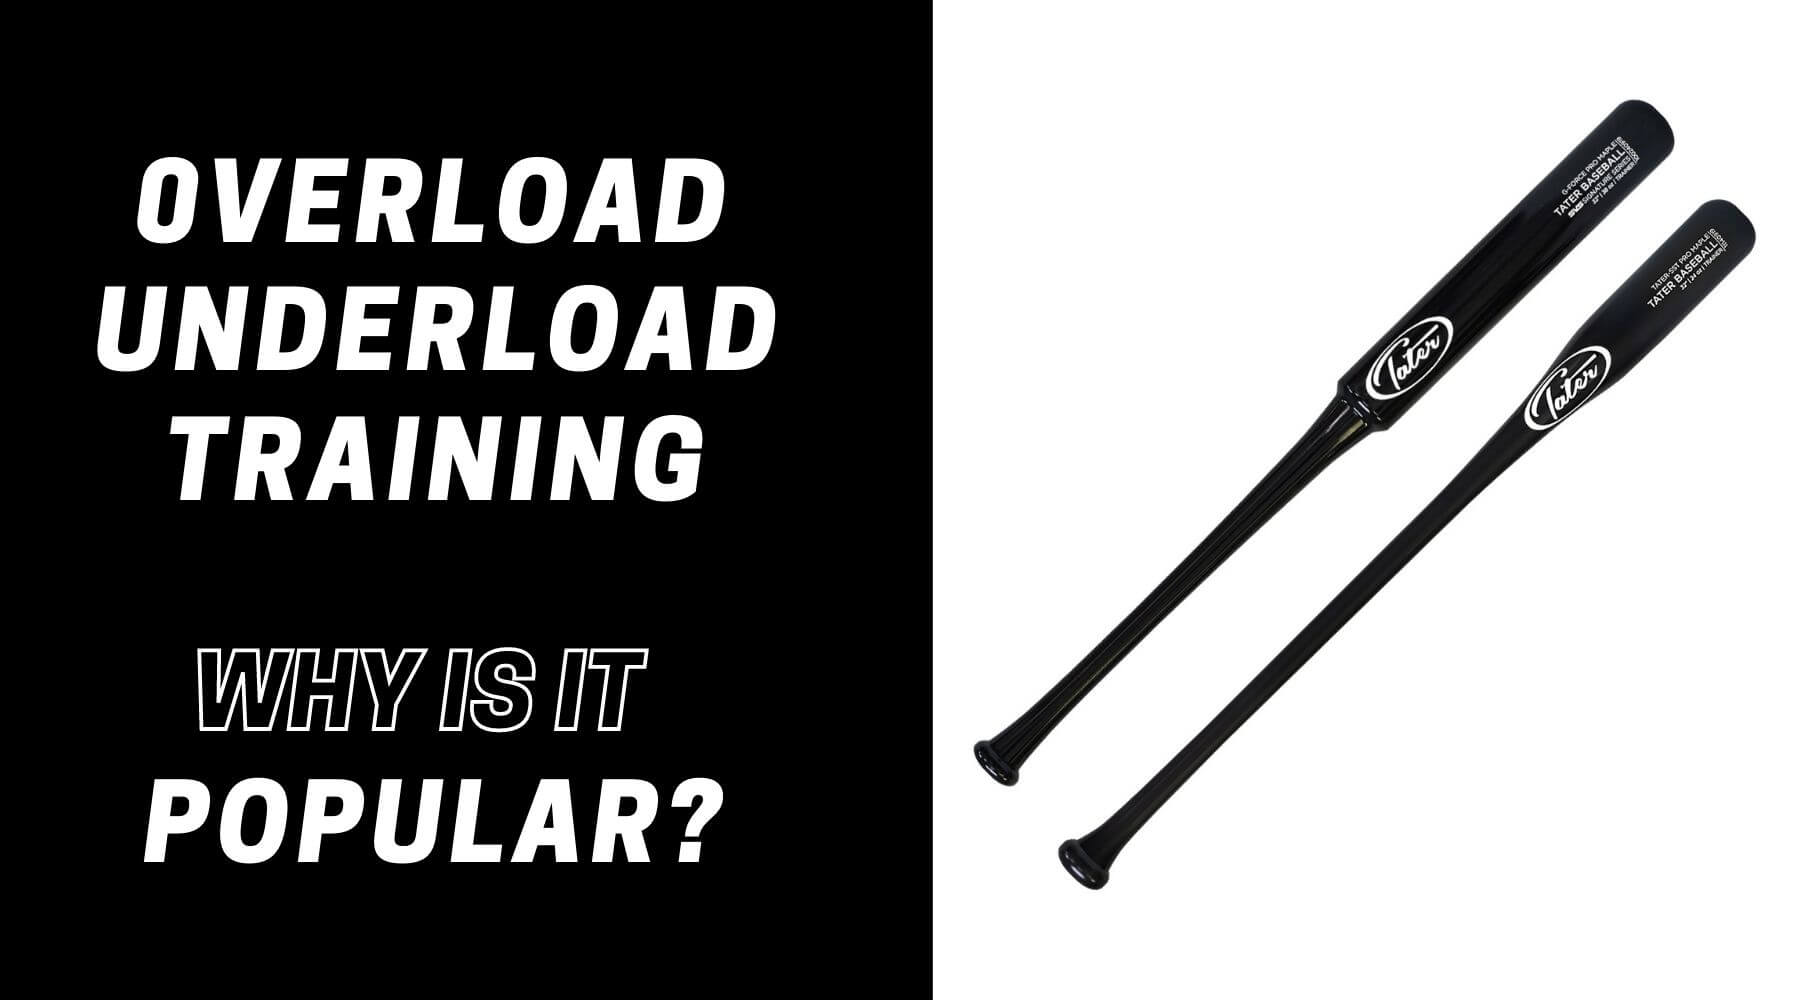 Overload and Underload Training. Why is it Popular?